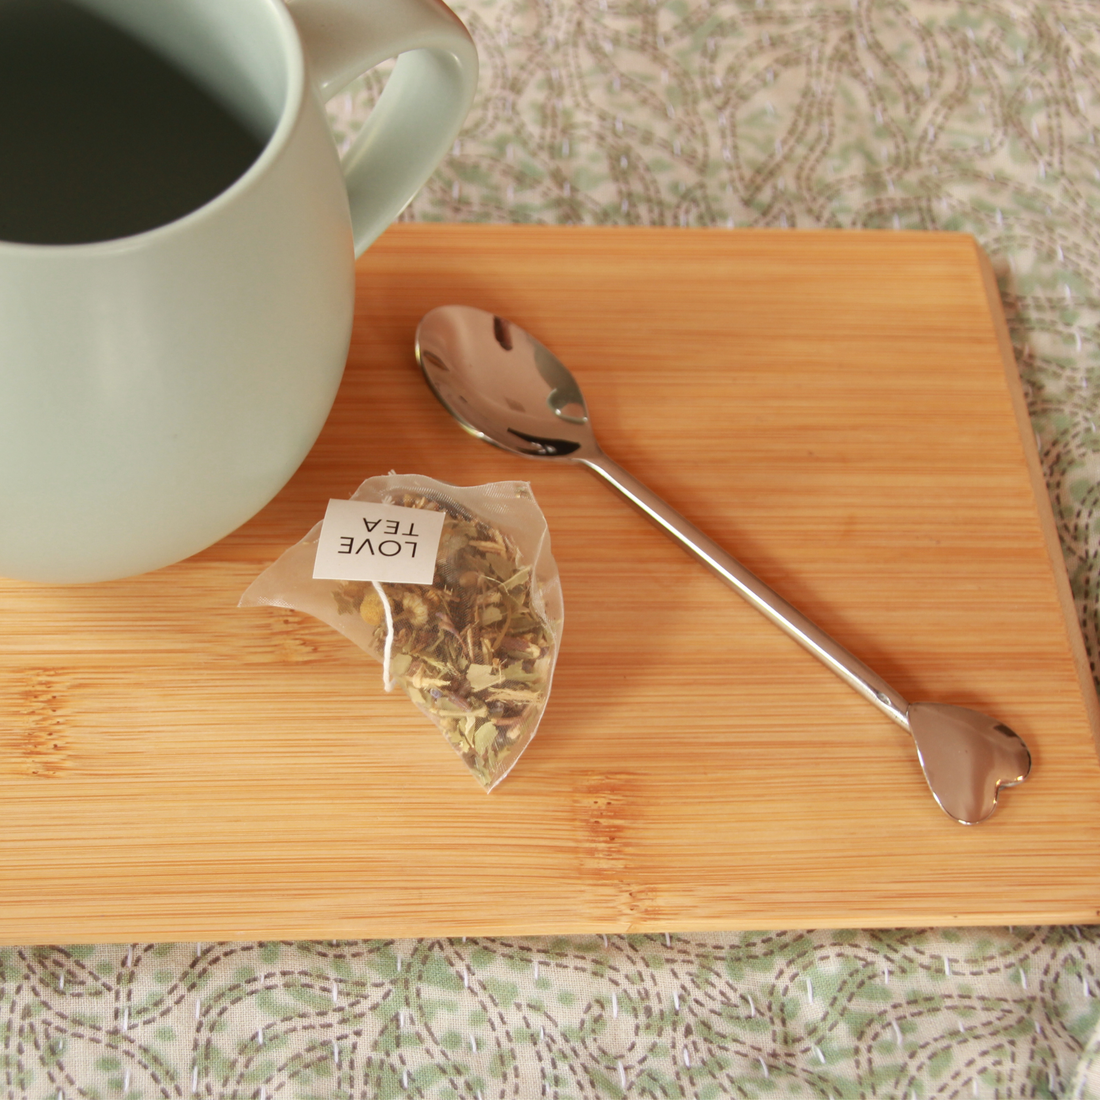 Table and Kitchen fair trade ethical sustainable fashion Heart Teaspoon Set conscious purchase Fair Go Trading